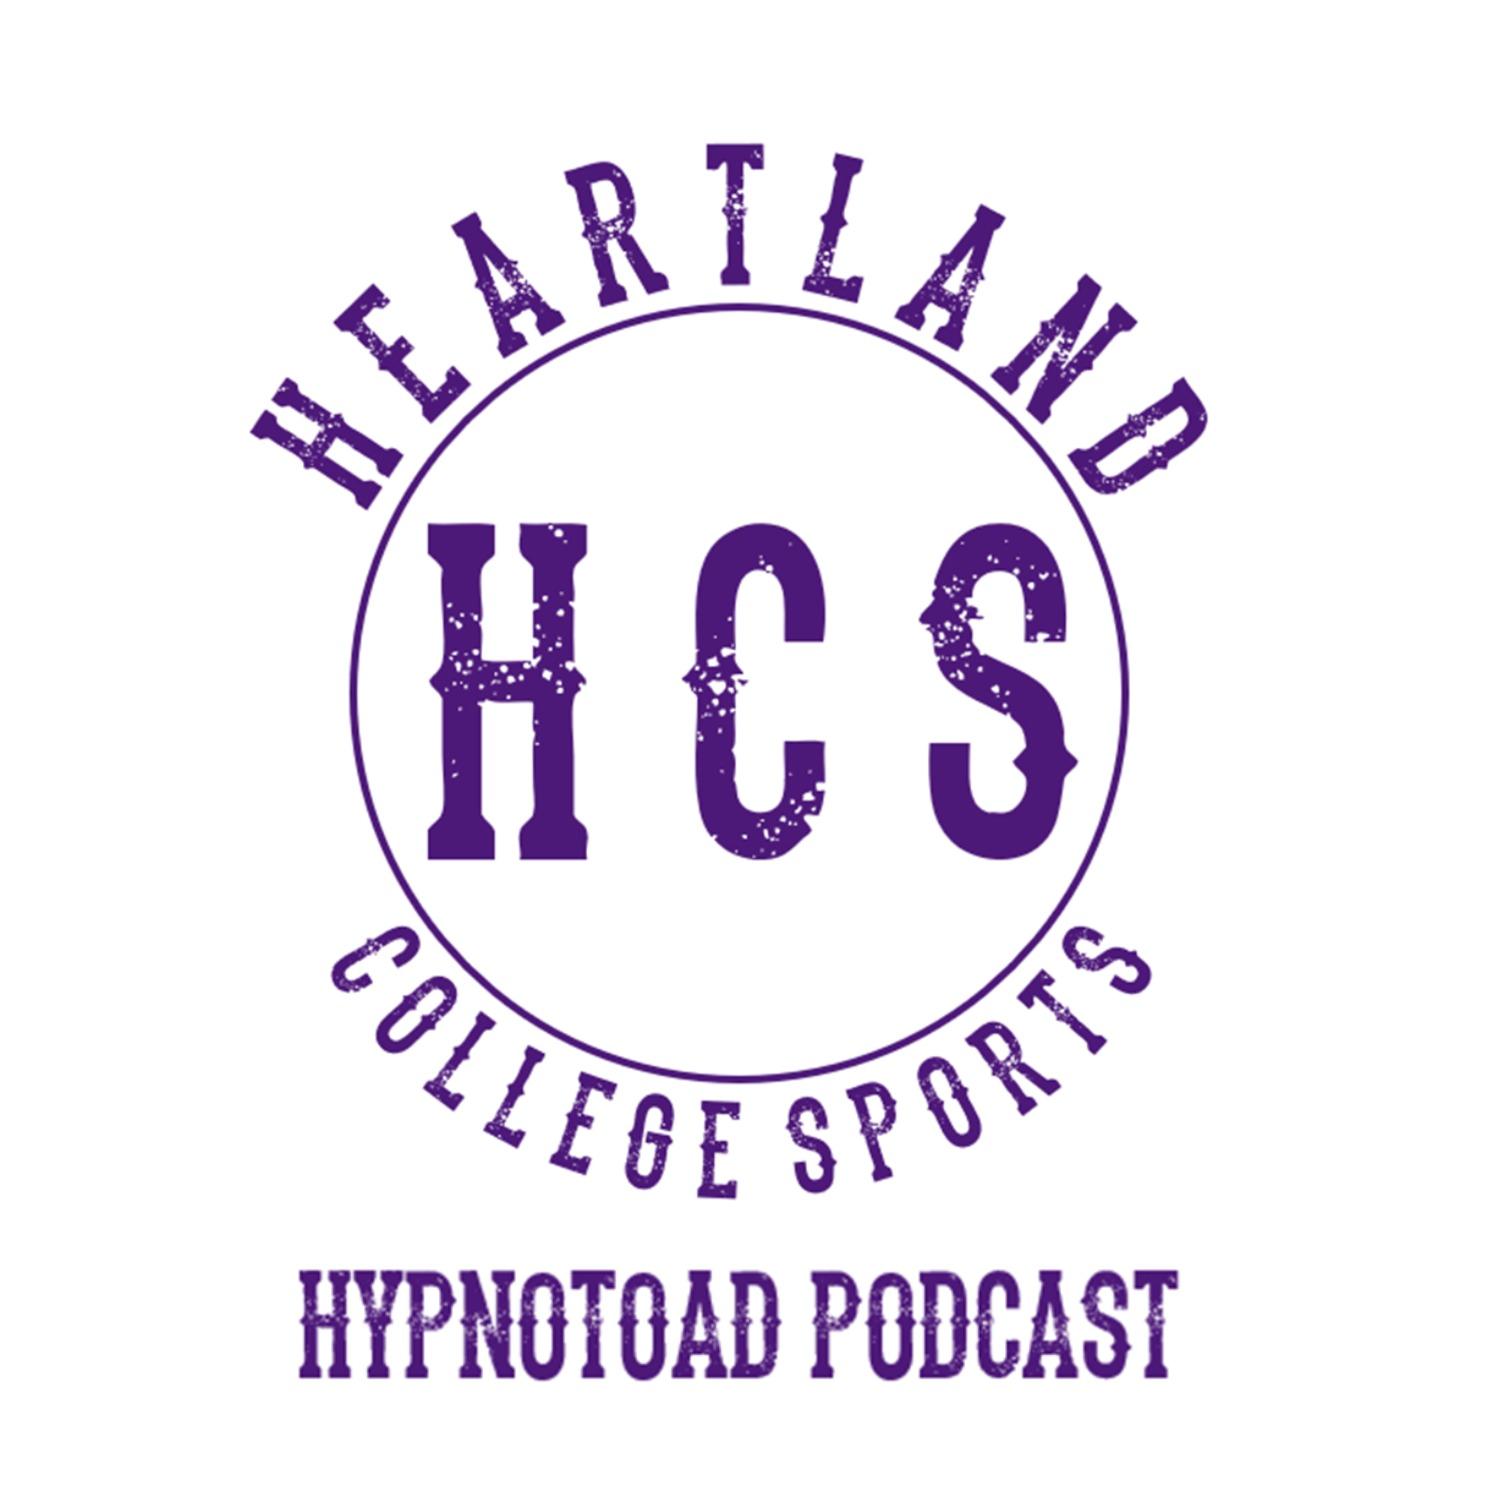 HypnoToad: A TCU Horned Frogs Podcast